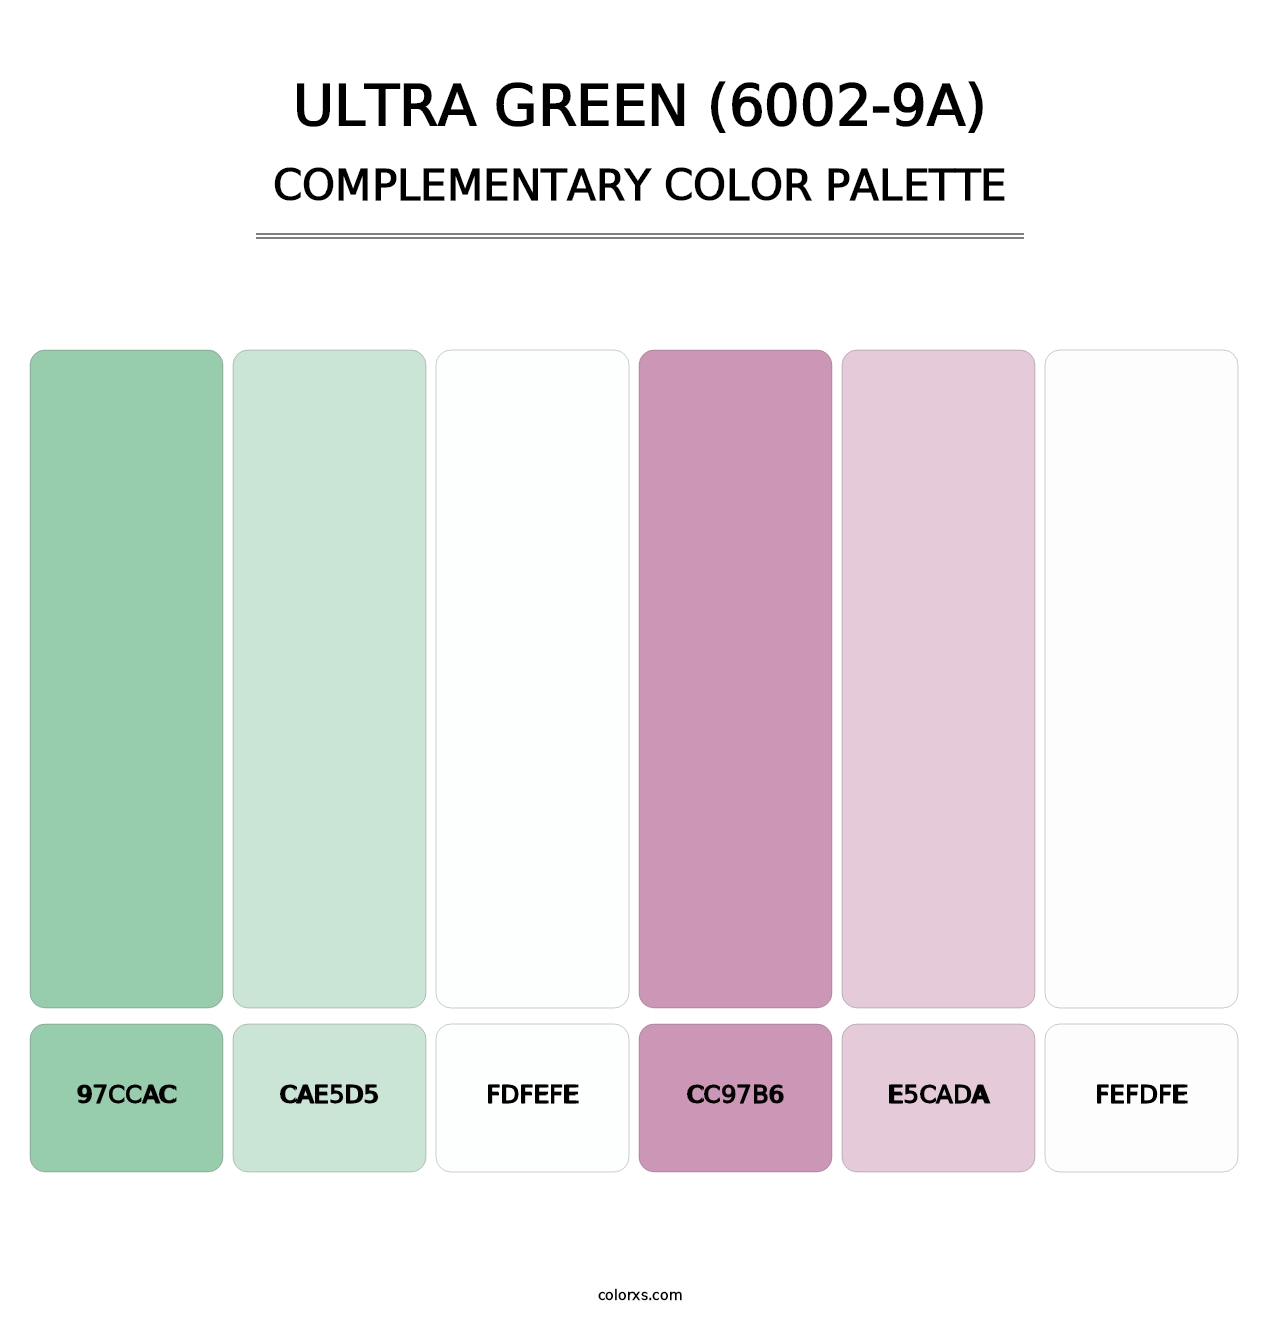 Ultra Green (6002-9A) - Complementary Color Palette